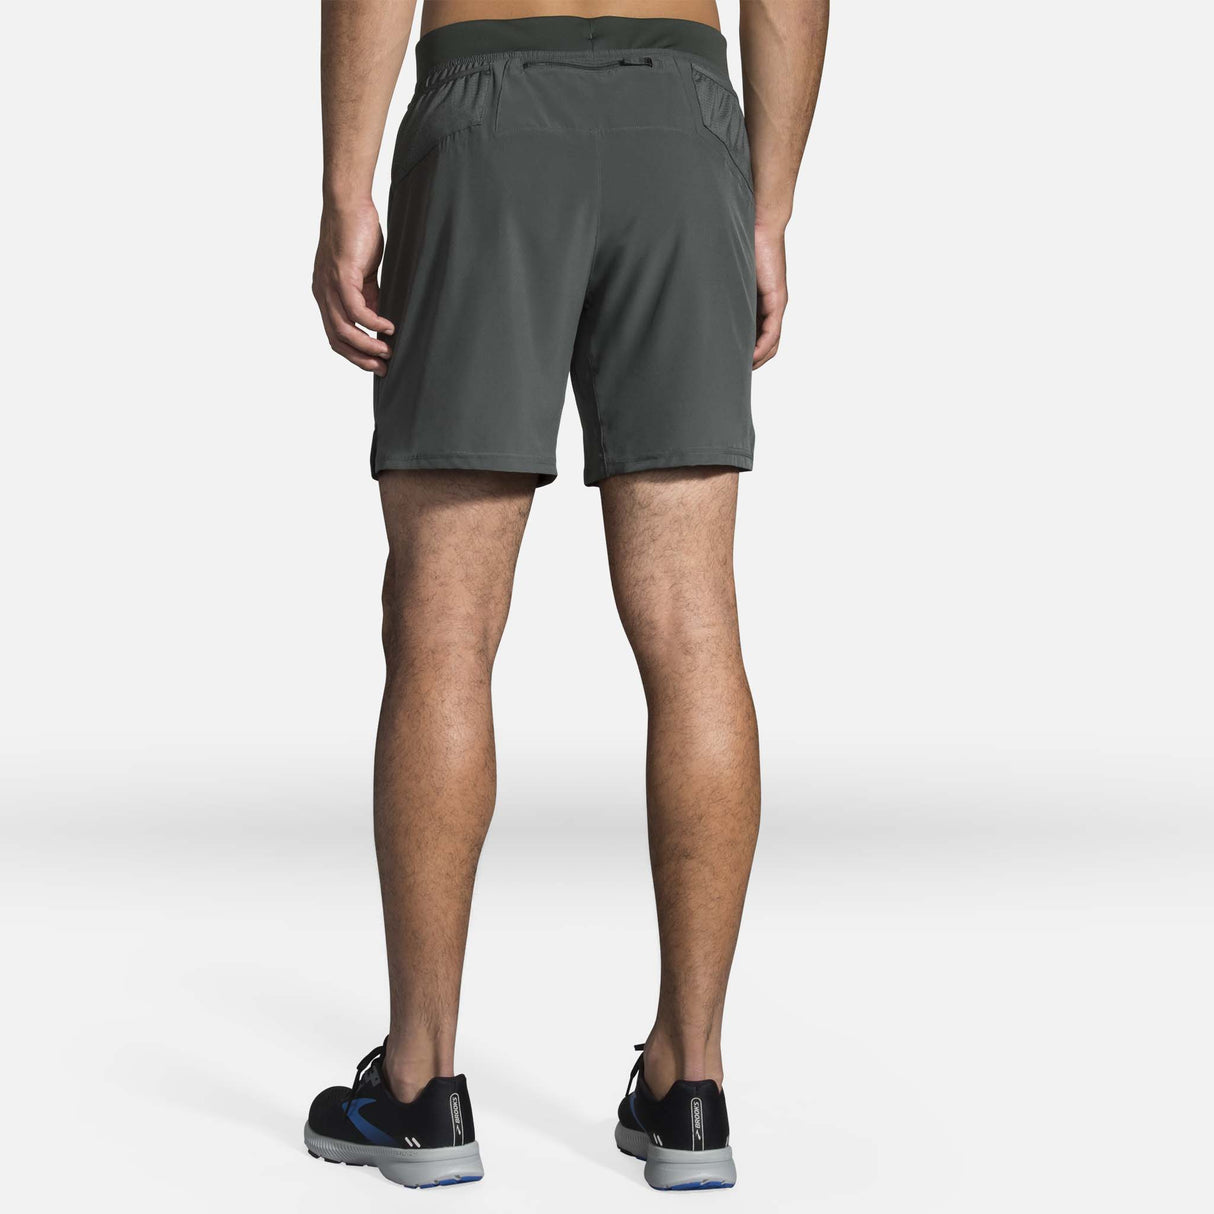 Brooks Sherpa 7 pouces short course dark oyster homme dos